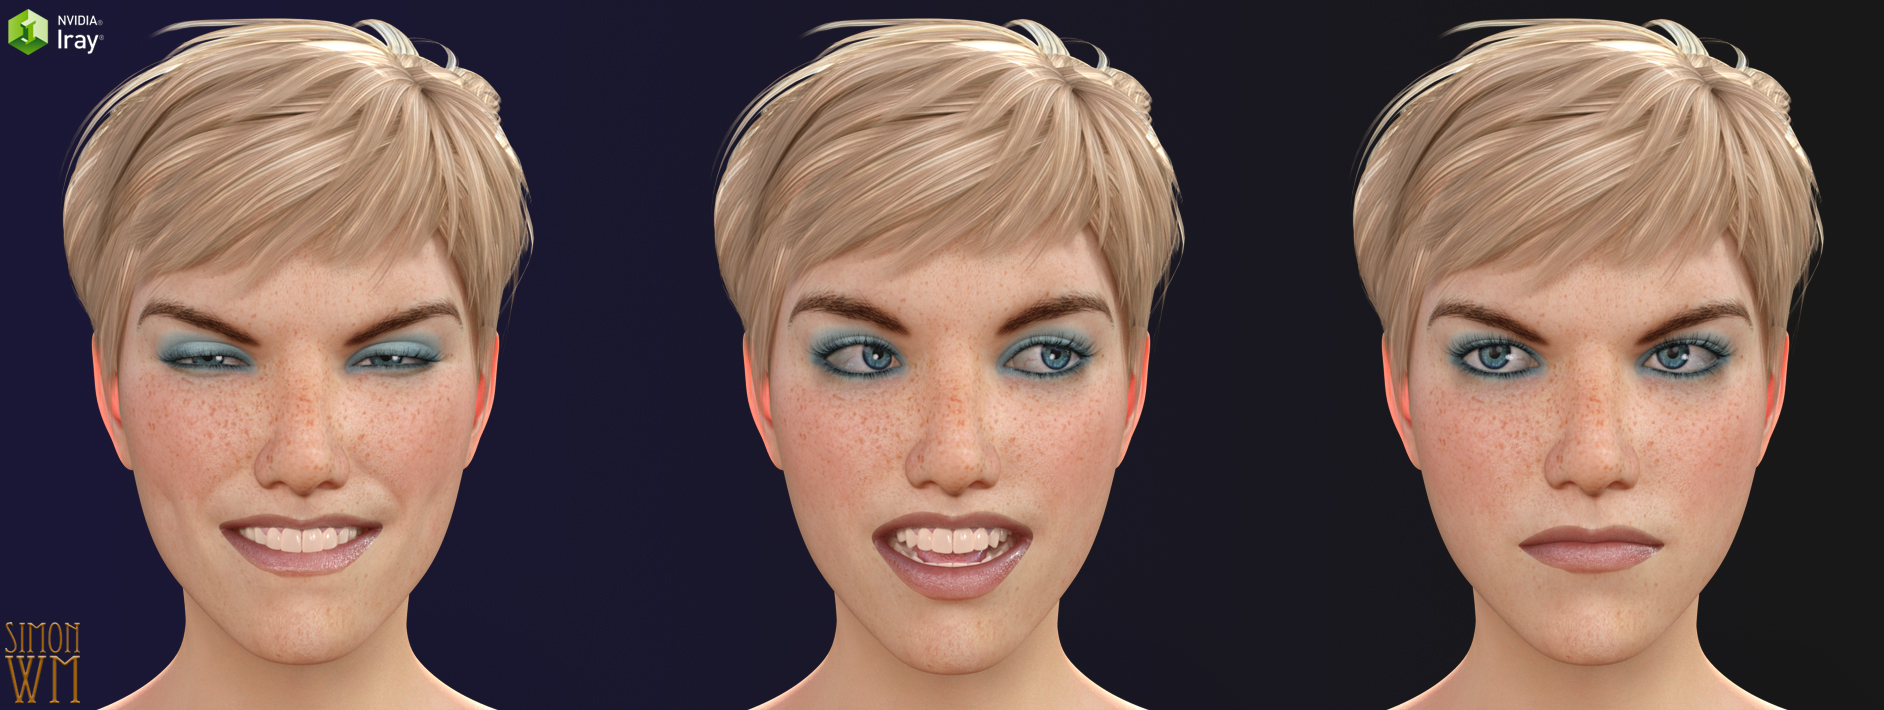 More Genesis 8 Female(s) Expressions & Face aniBlocks by: SimonWM, 3D Models by Daz 3D